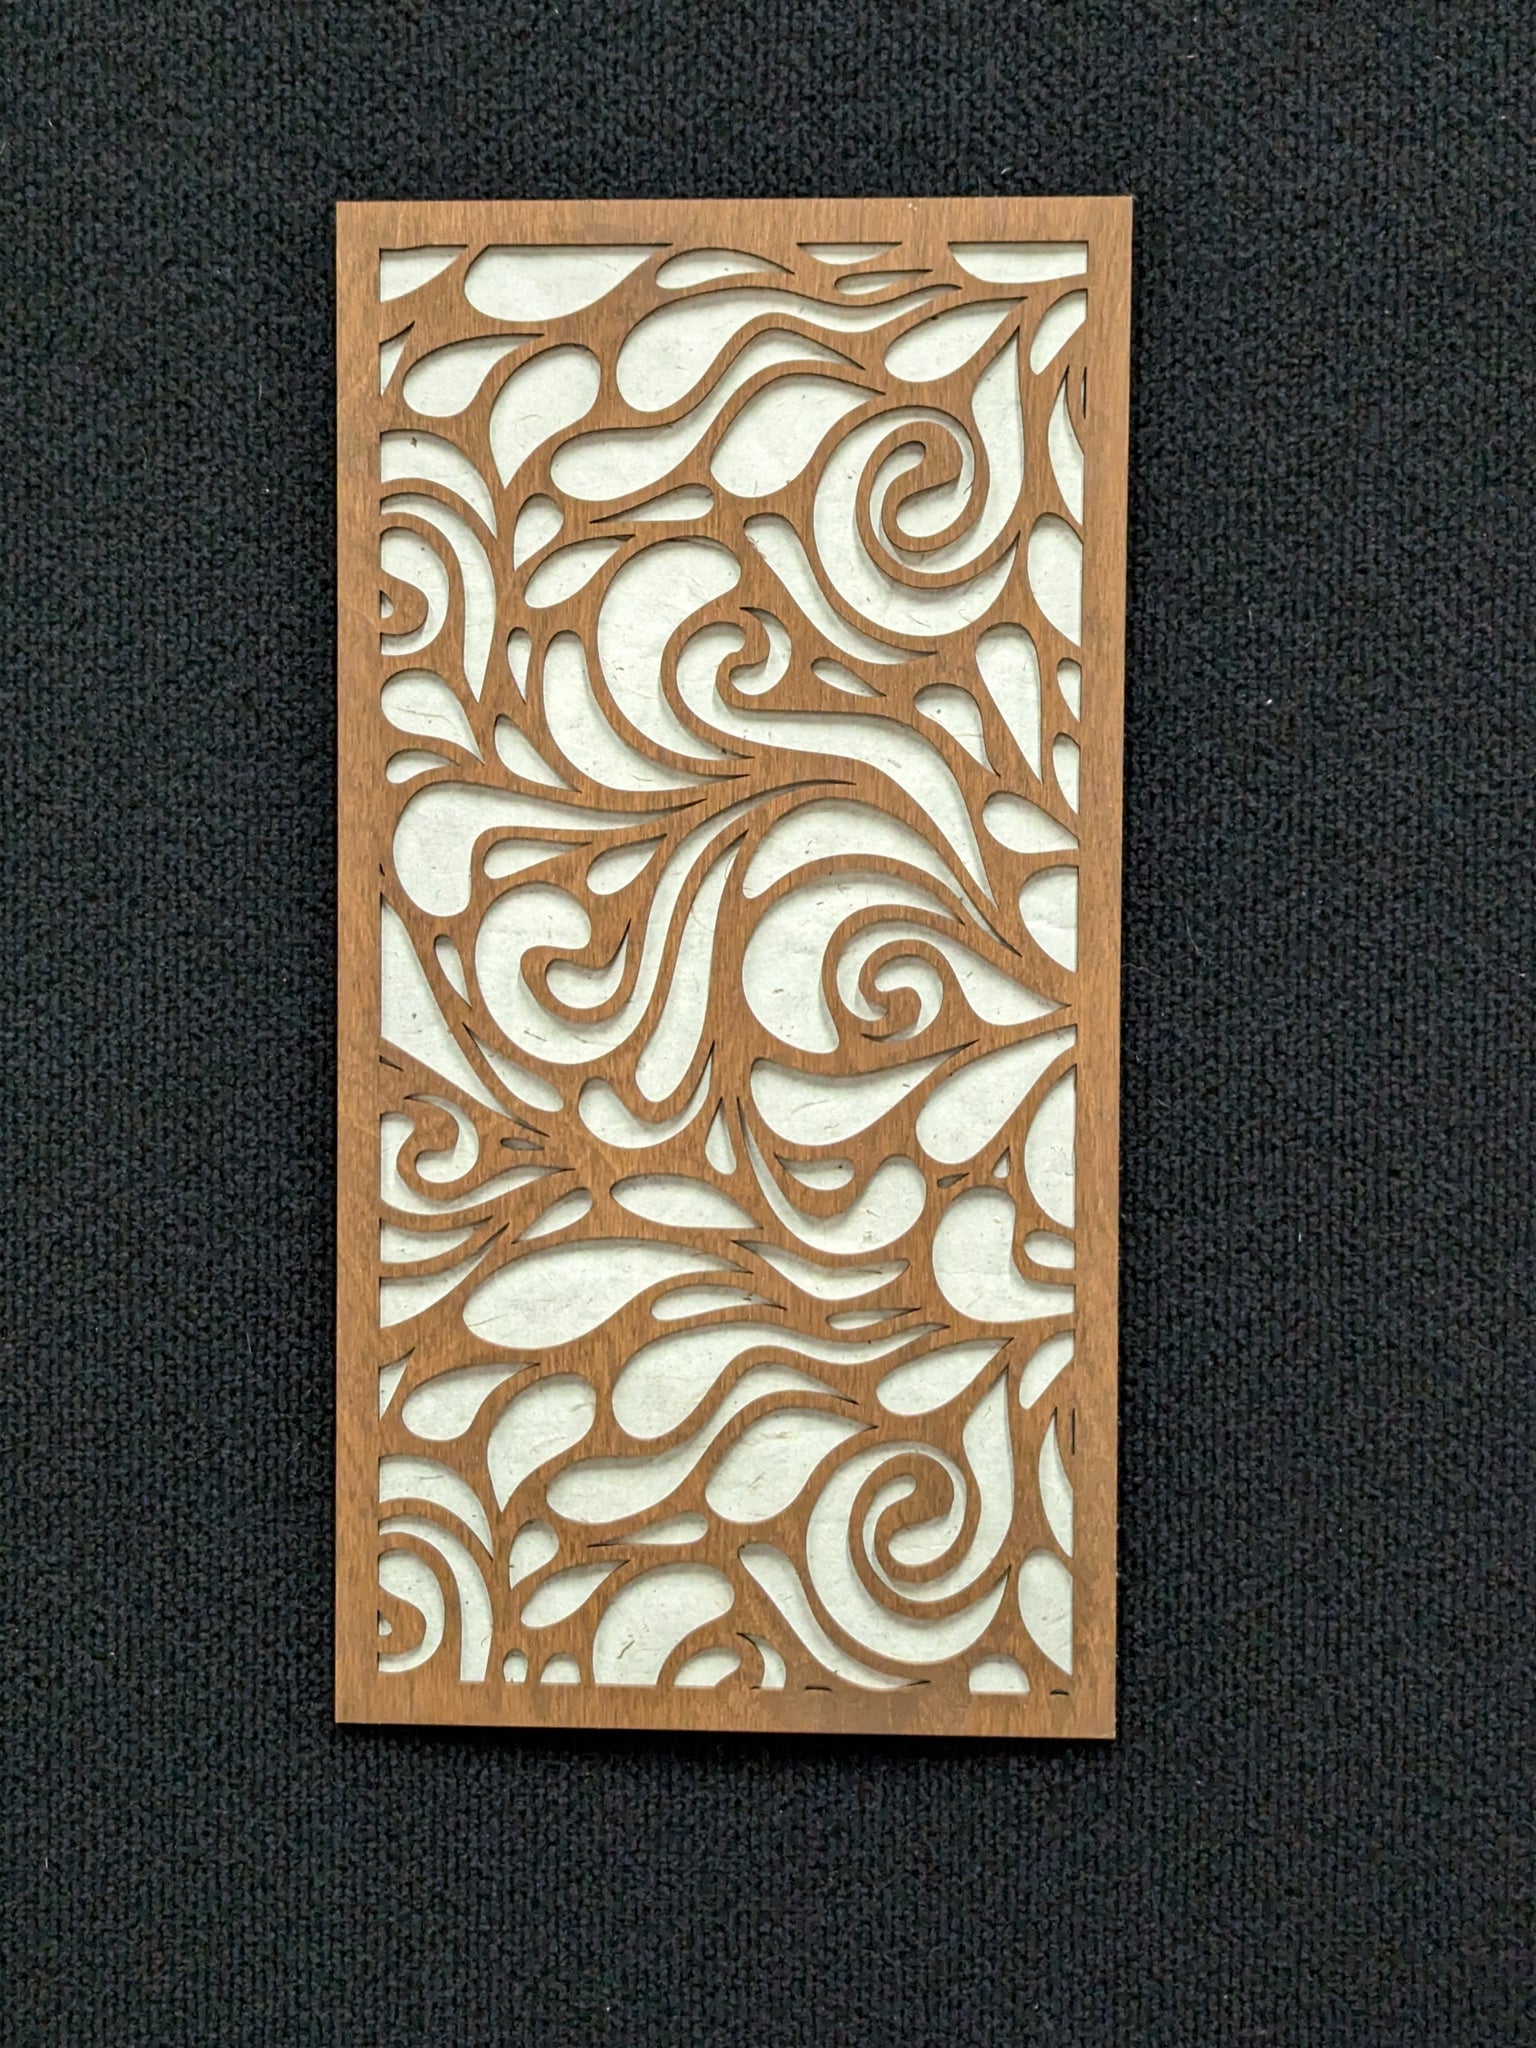 Wood Wall Art  - Lava Lamp design with rice paper